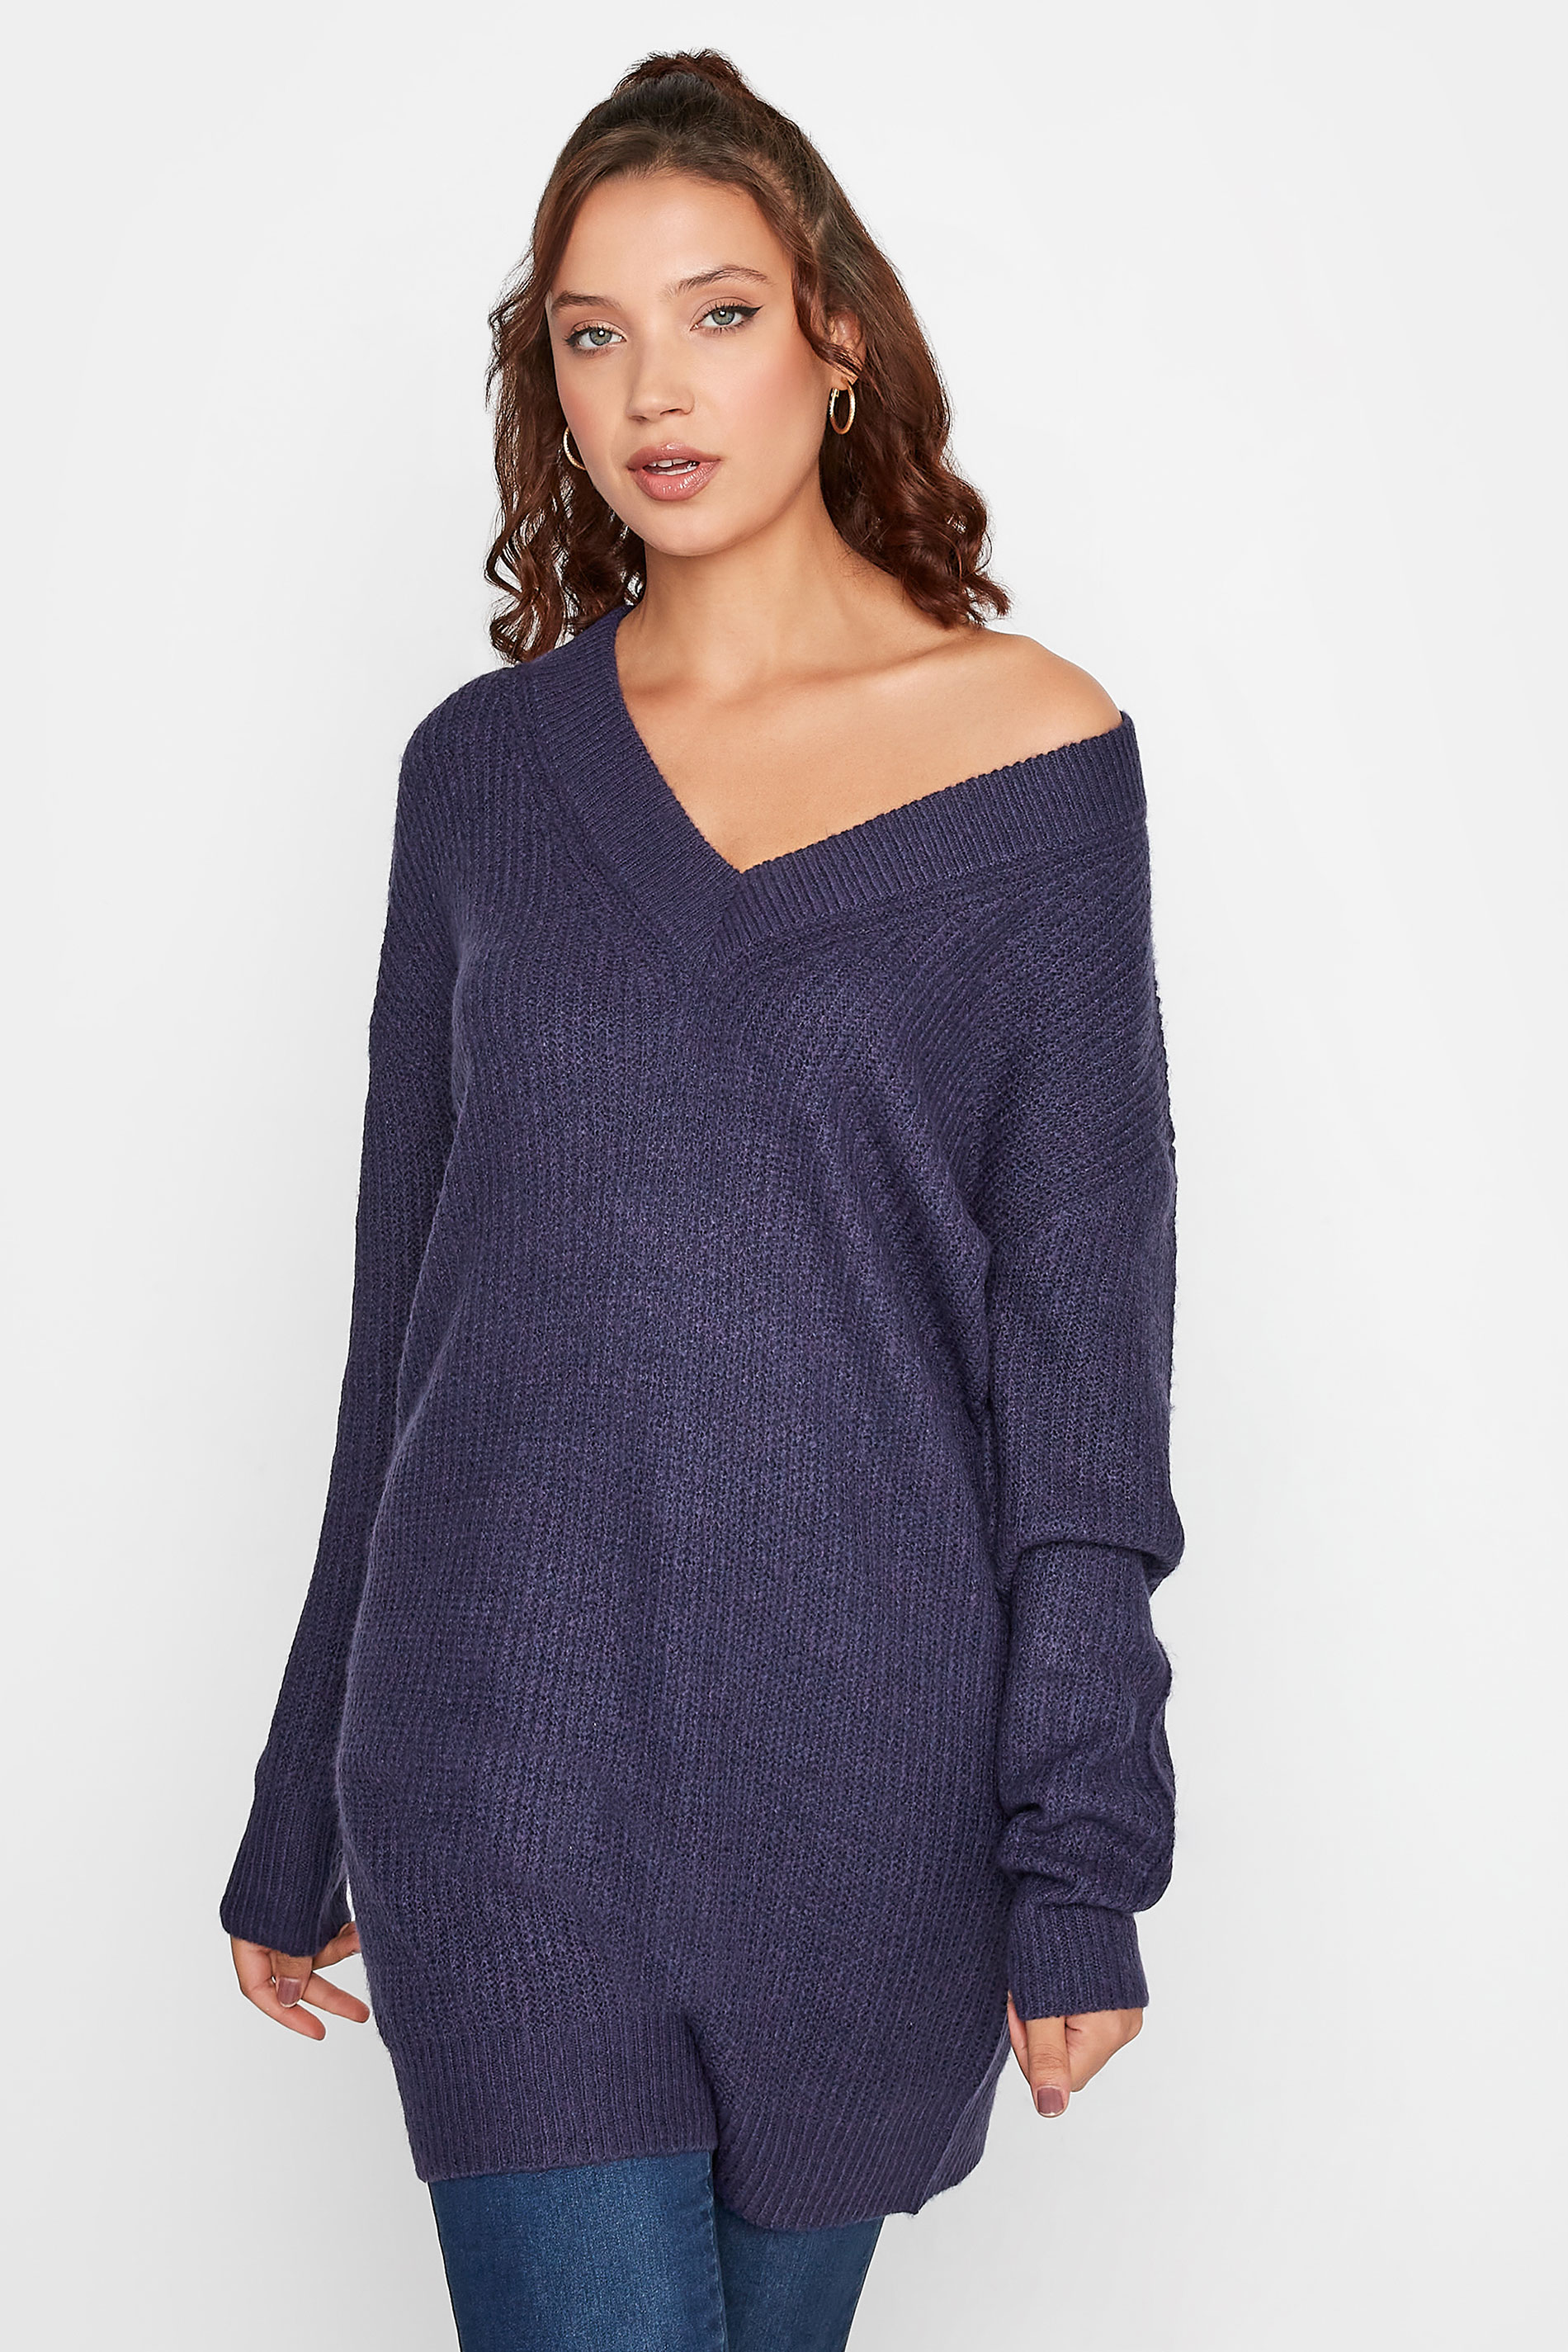 LTS Tall Navy Blue V-Neck Knitted Tunic Top 1